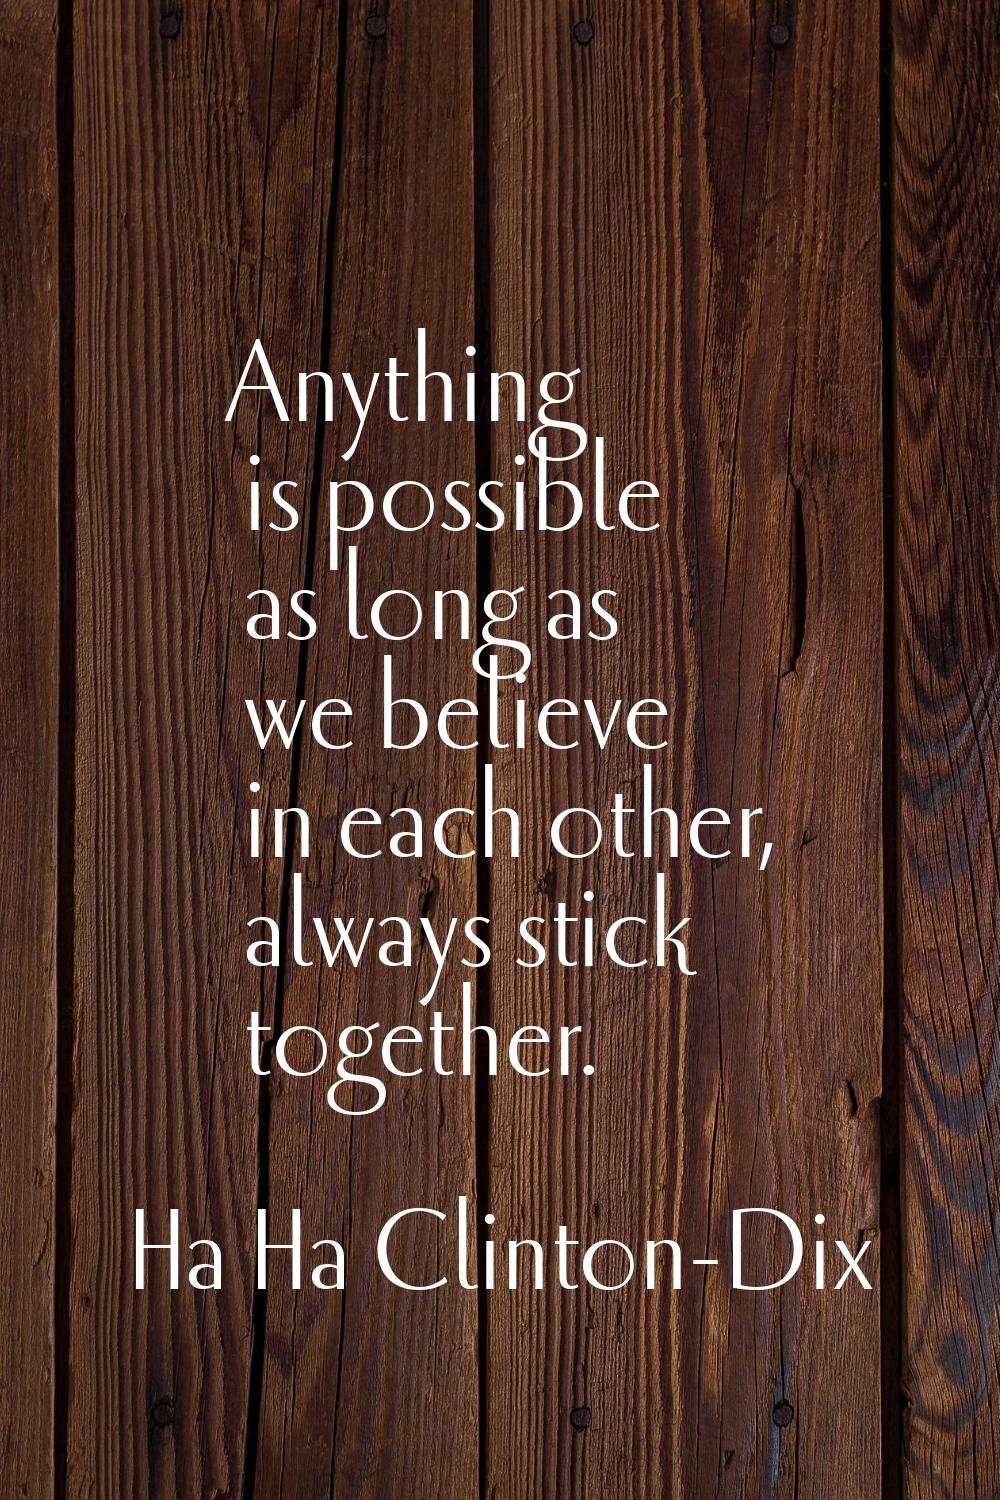 Anything is possible as long as we believe in each other, always stick together.